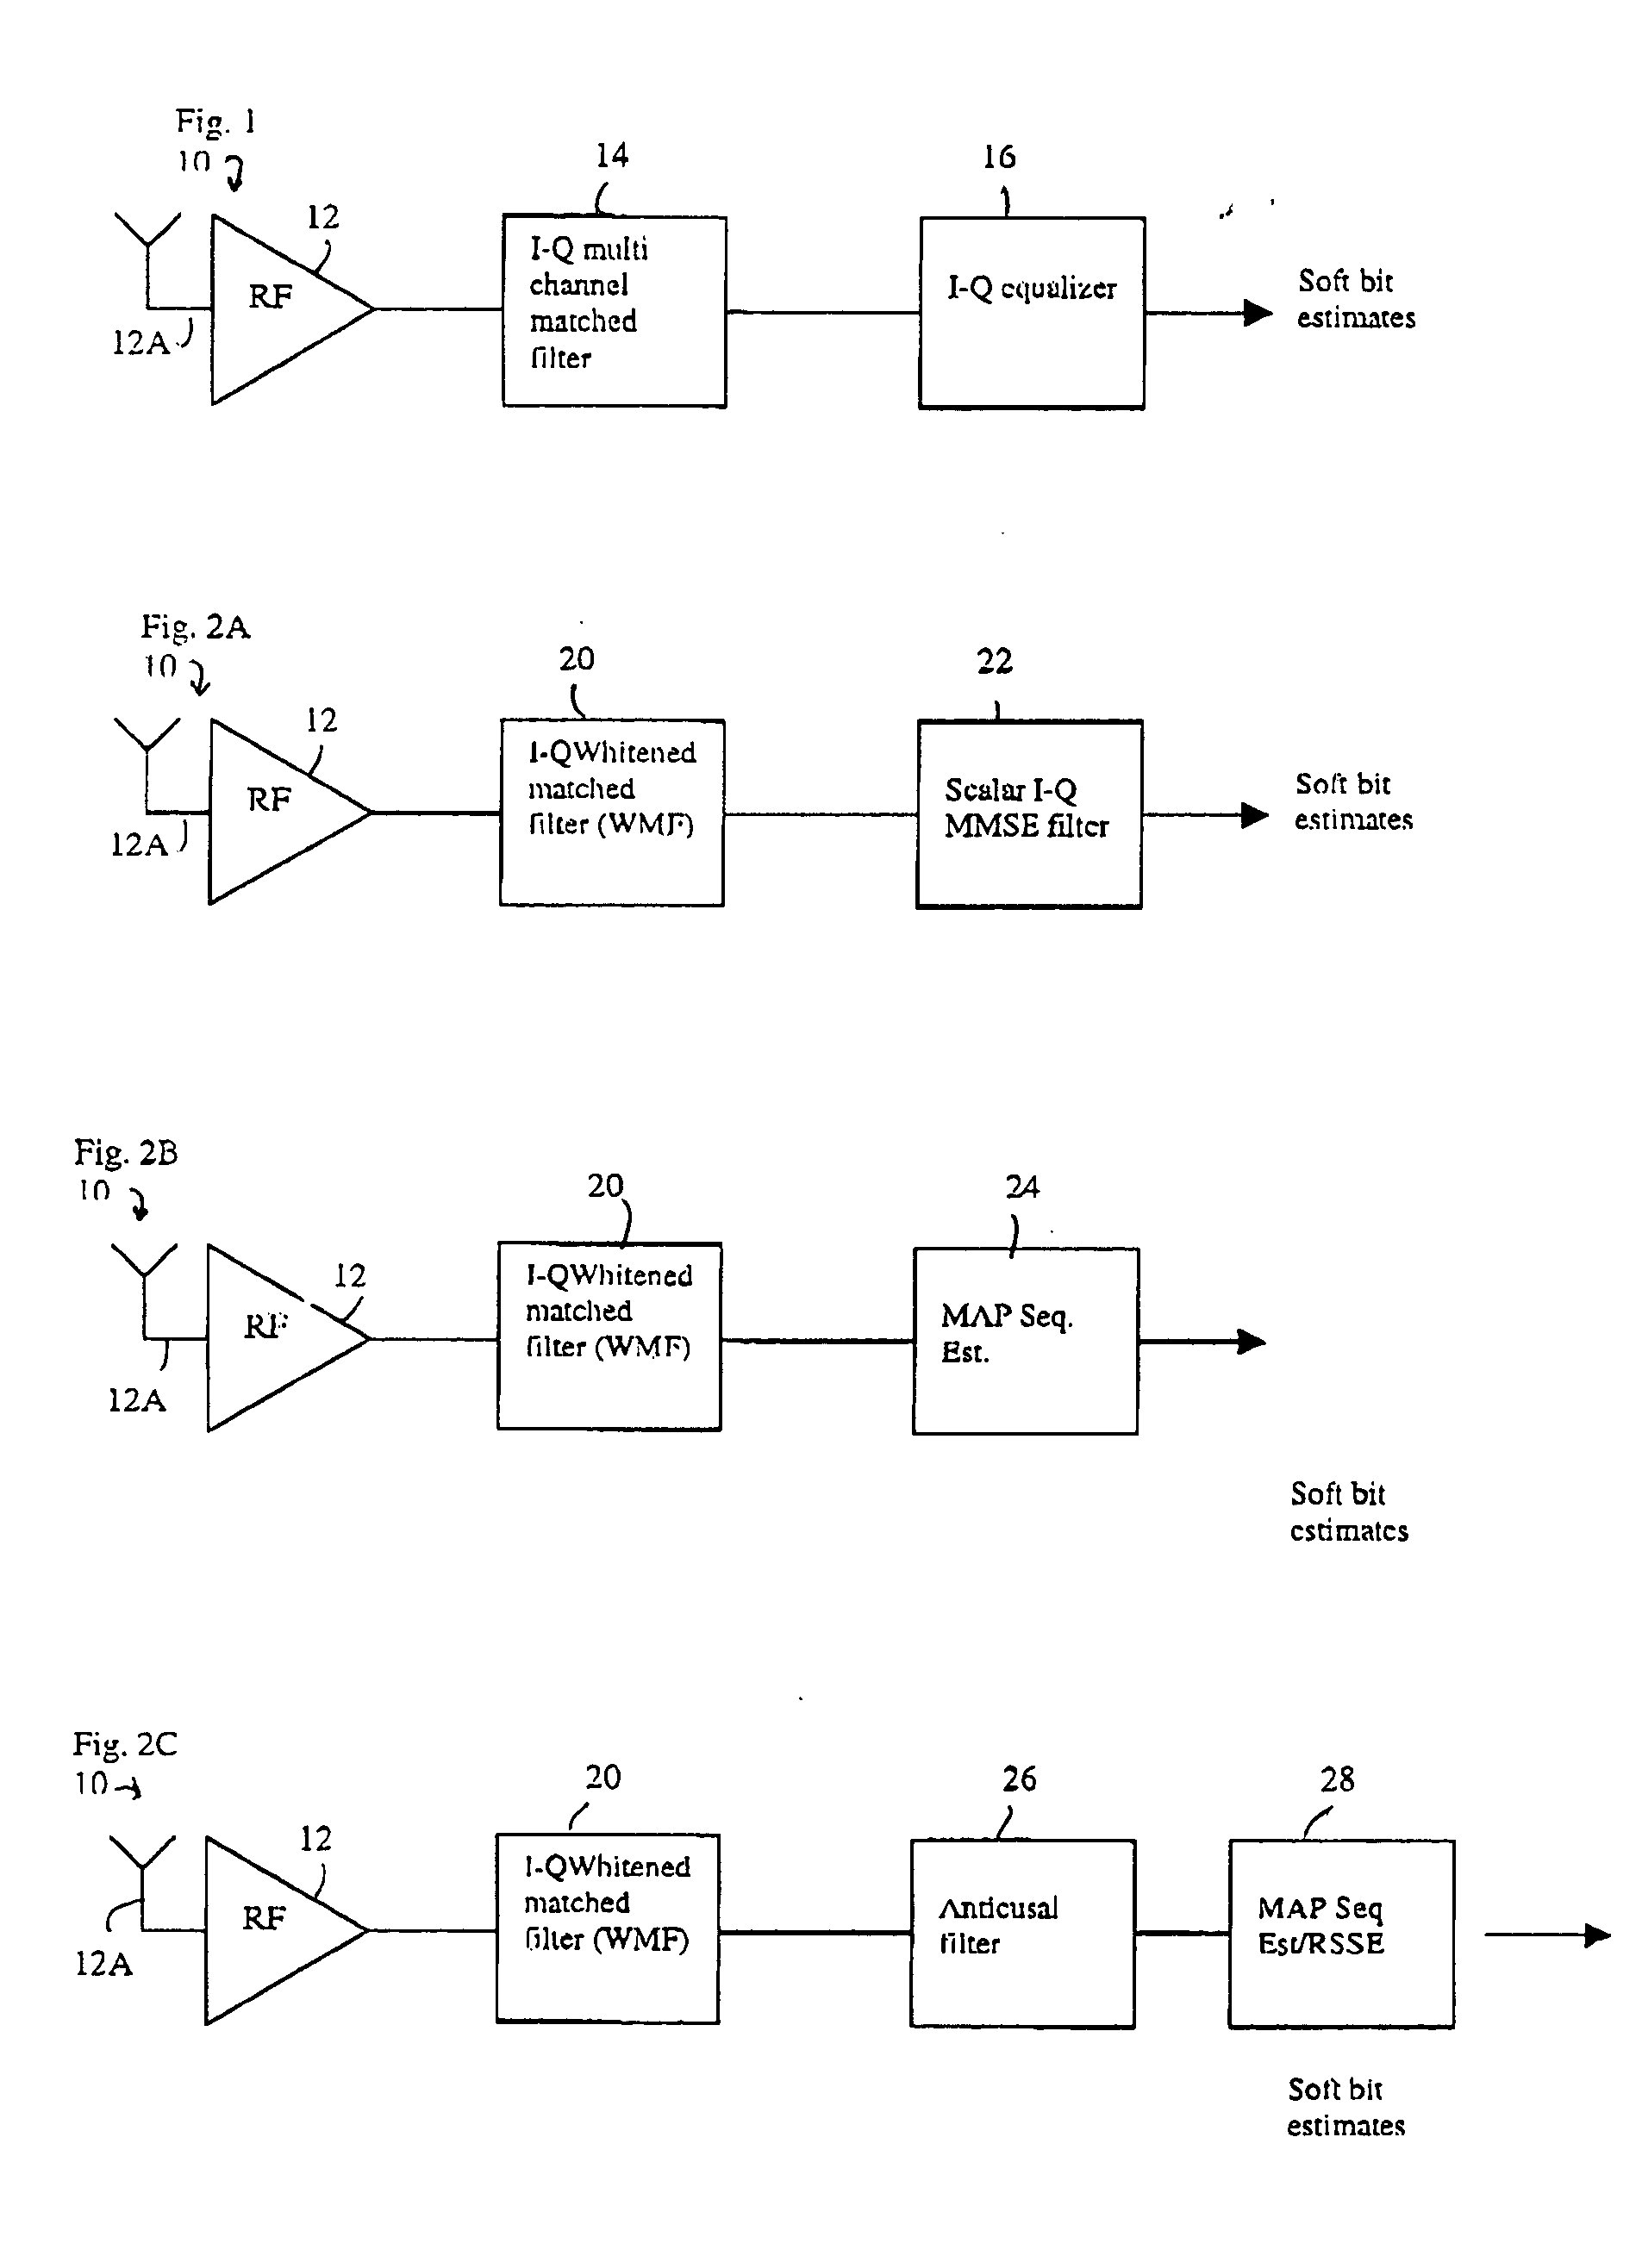 Method and apparatus providing low complexity equalization and interference suppression for SAIC GSM/EDGE receiver